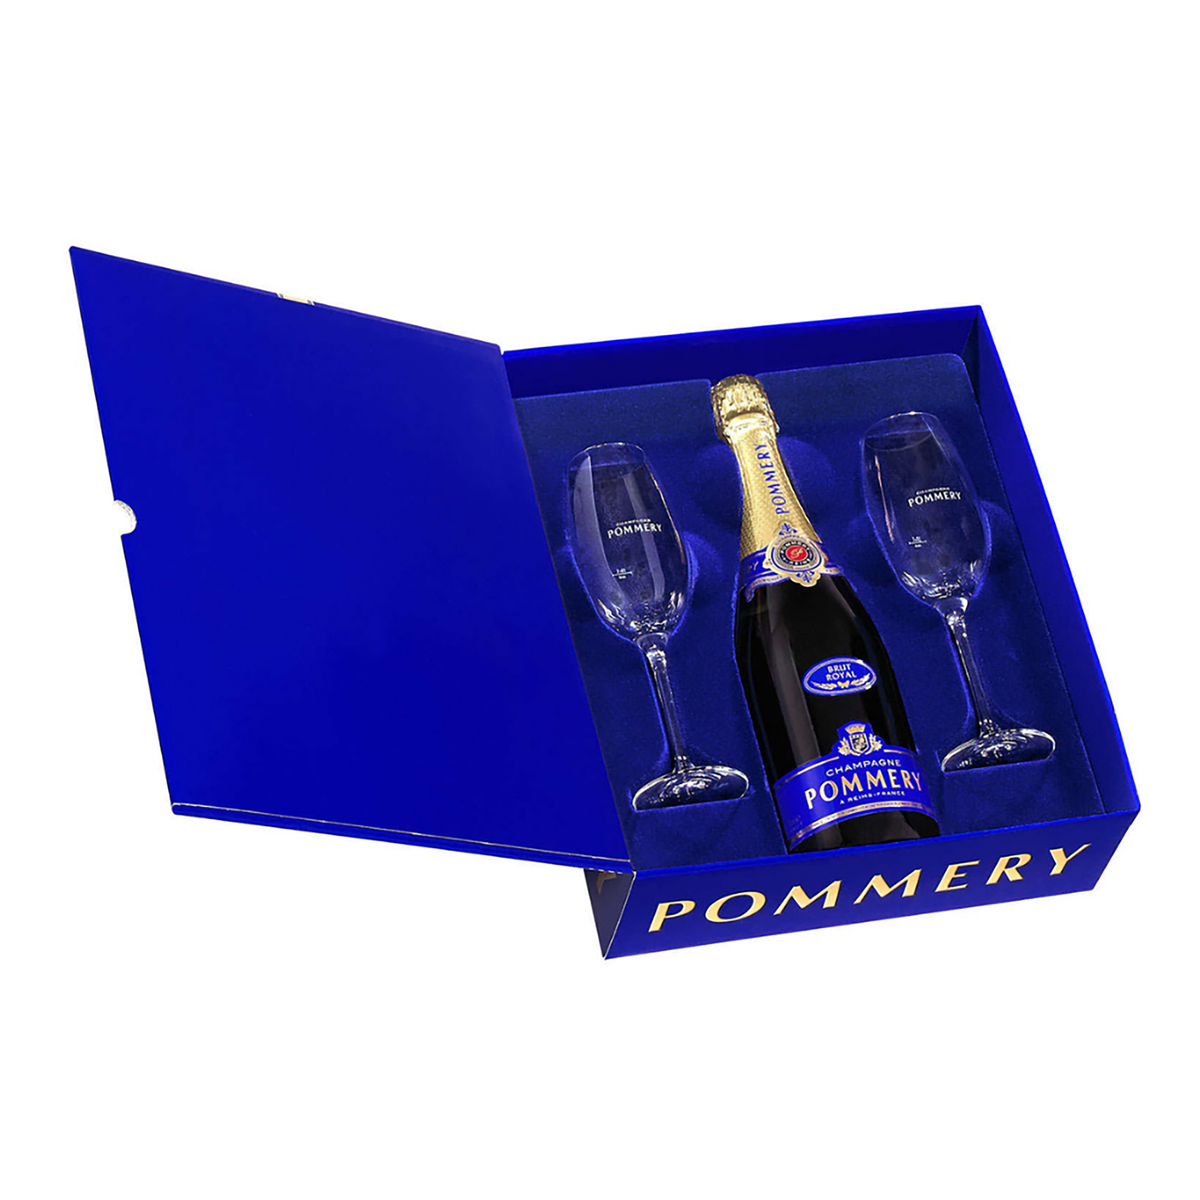 Pommery Champagne Brut Royal Coffret with 2 Champagne Glasses, 75 cl -  Delivery in Czech Republic by GiftsForEurope